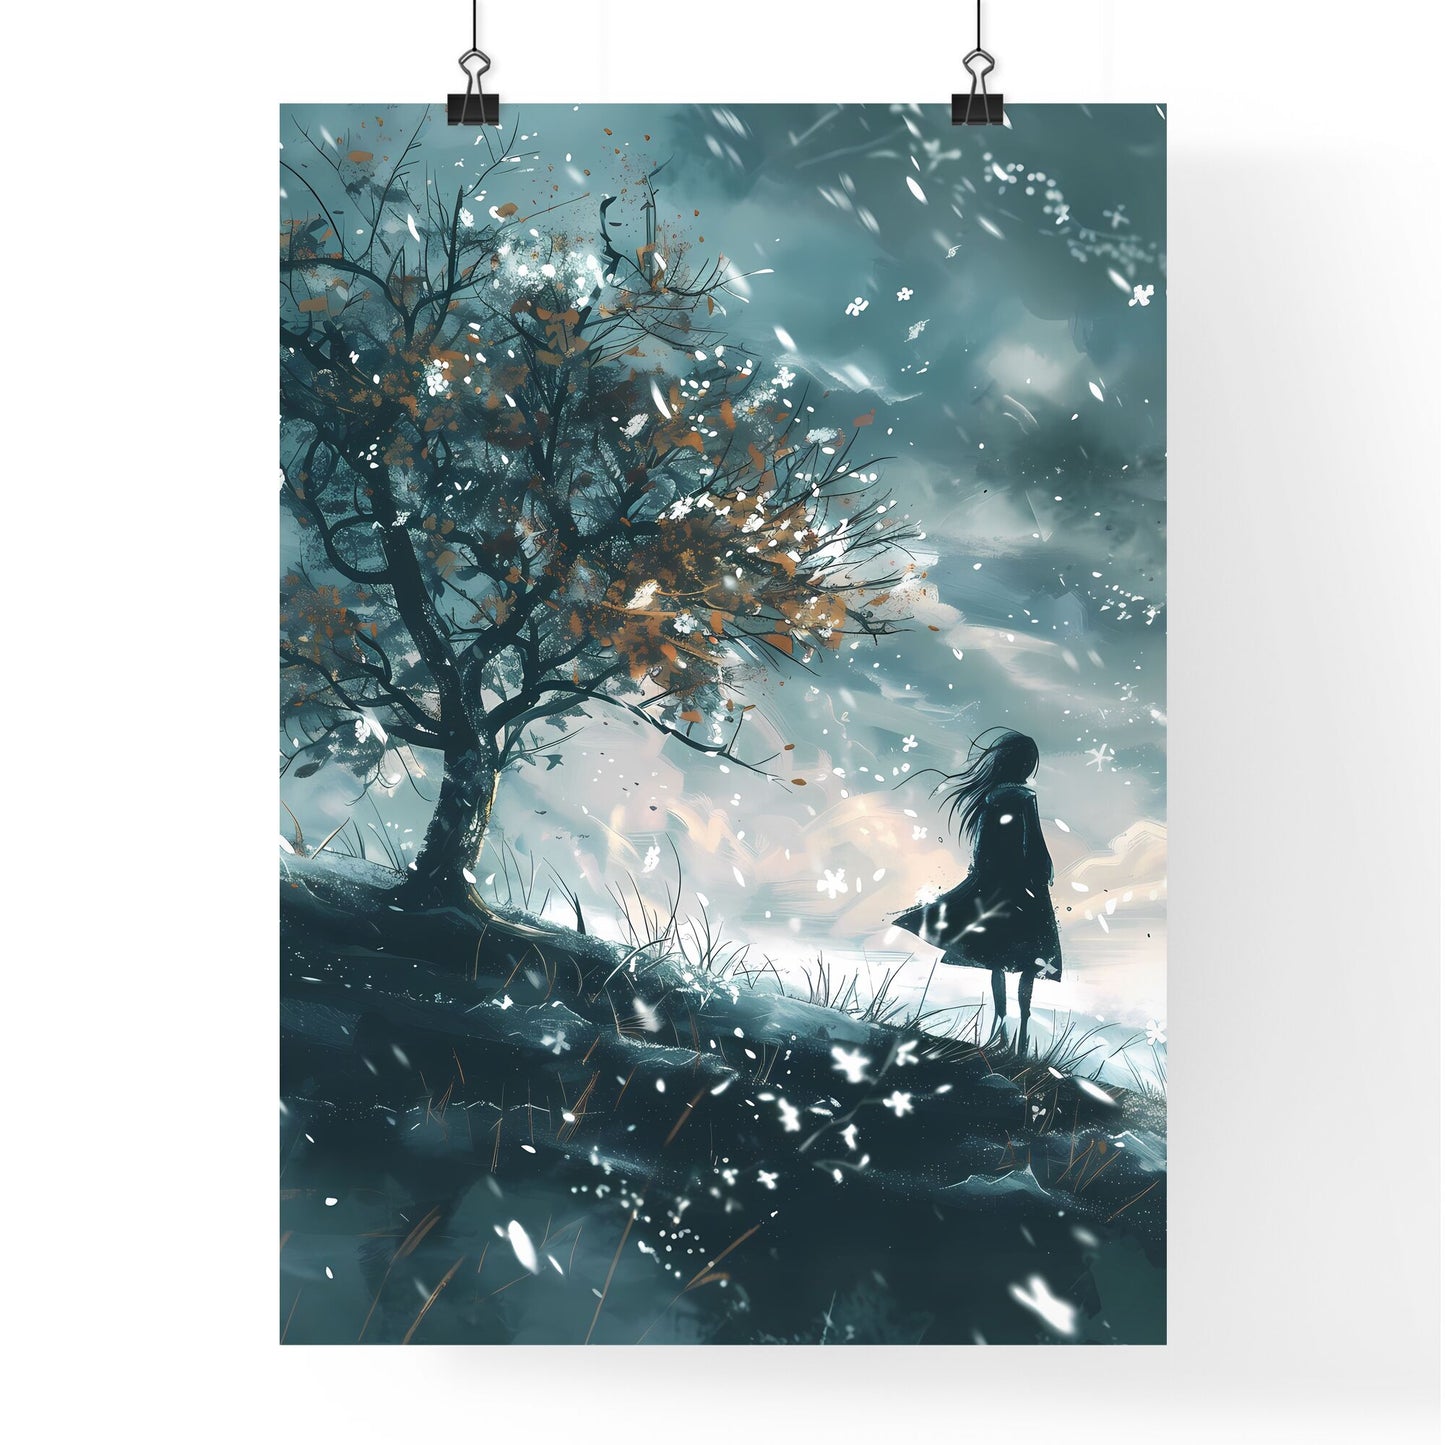 Enchanting Winter's Embrace: Traveler's Journey Amidst Thawing Landscape, Delicate Snowflakes, and Budding Spring Default Title